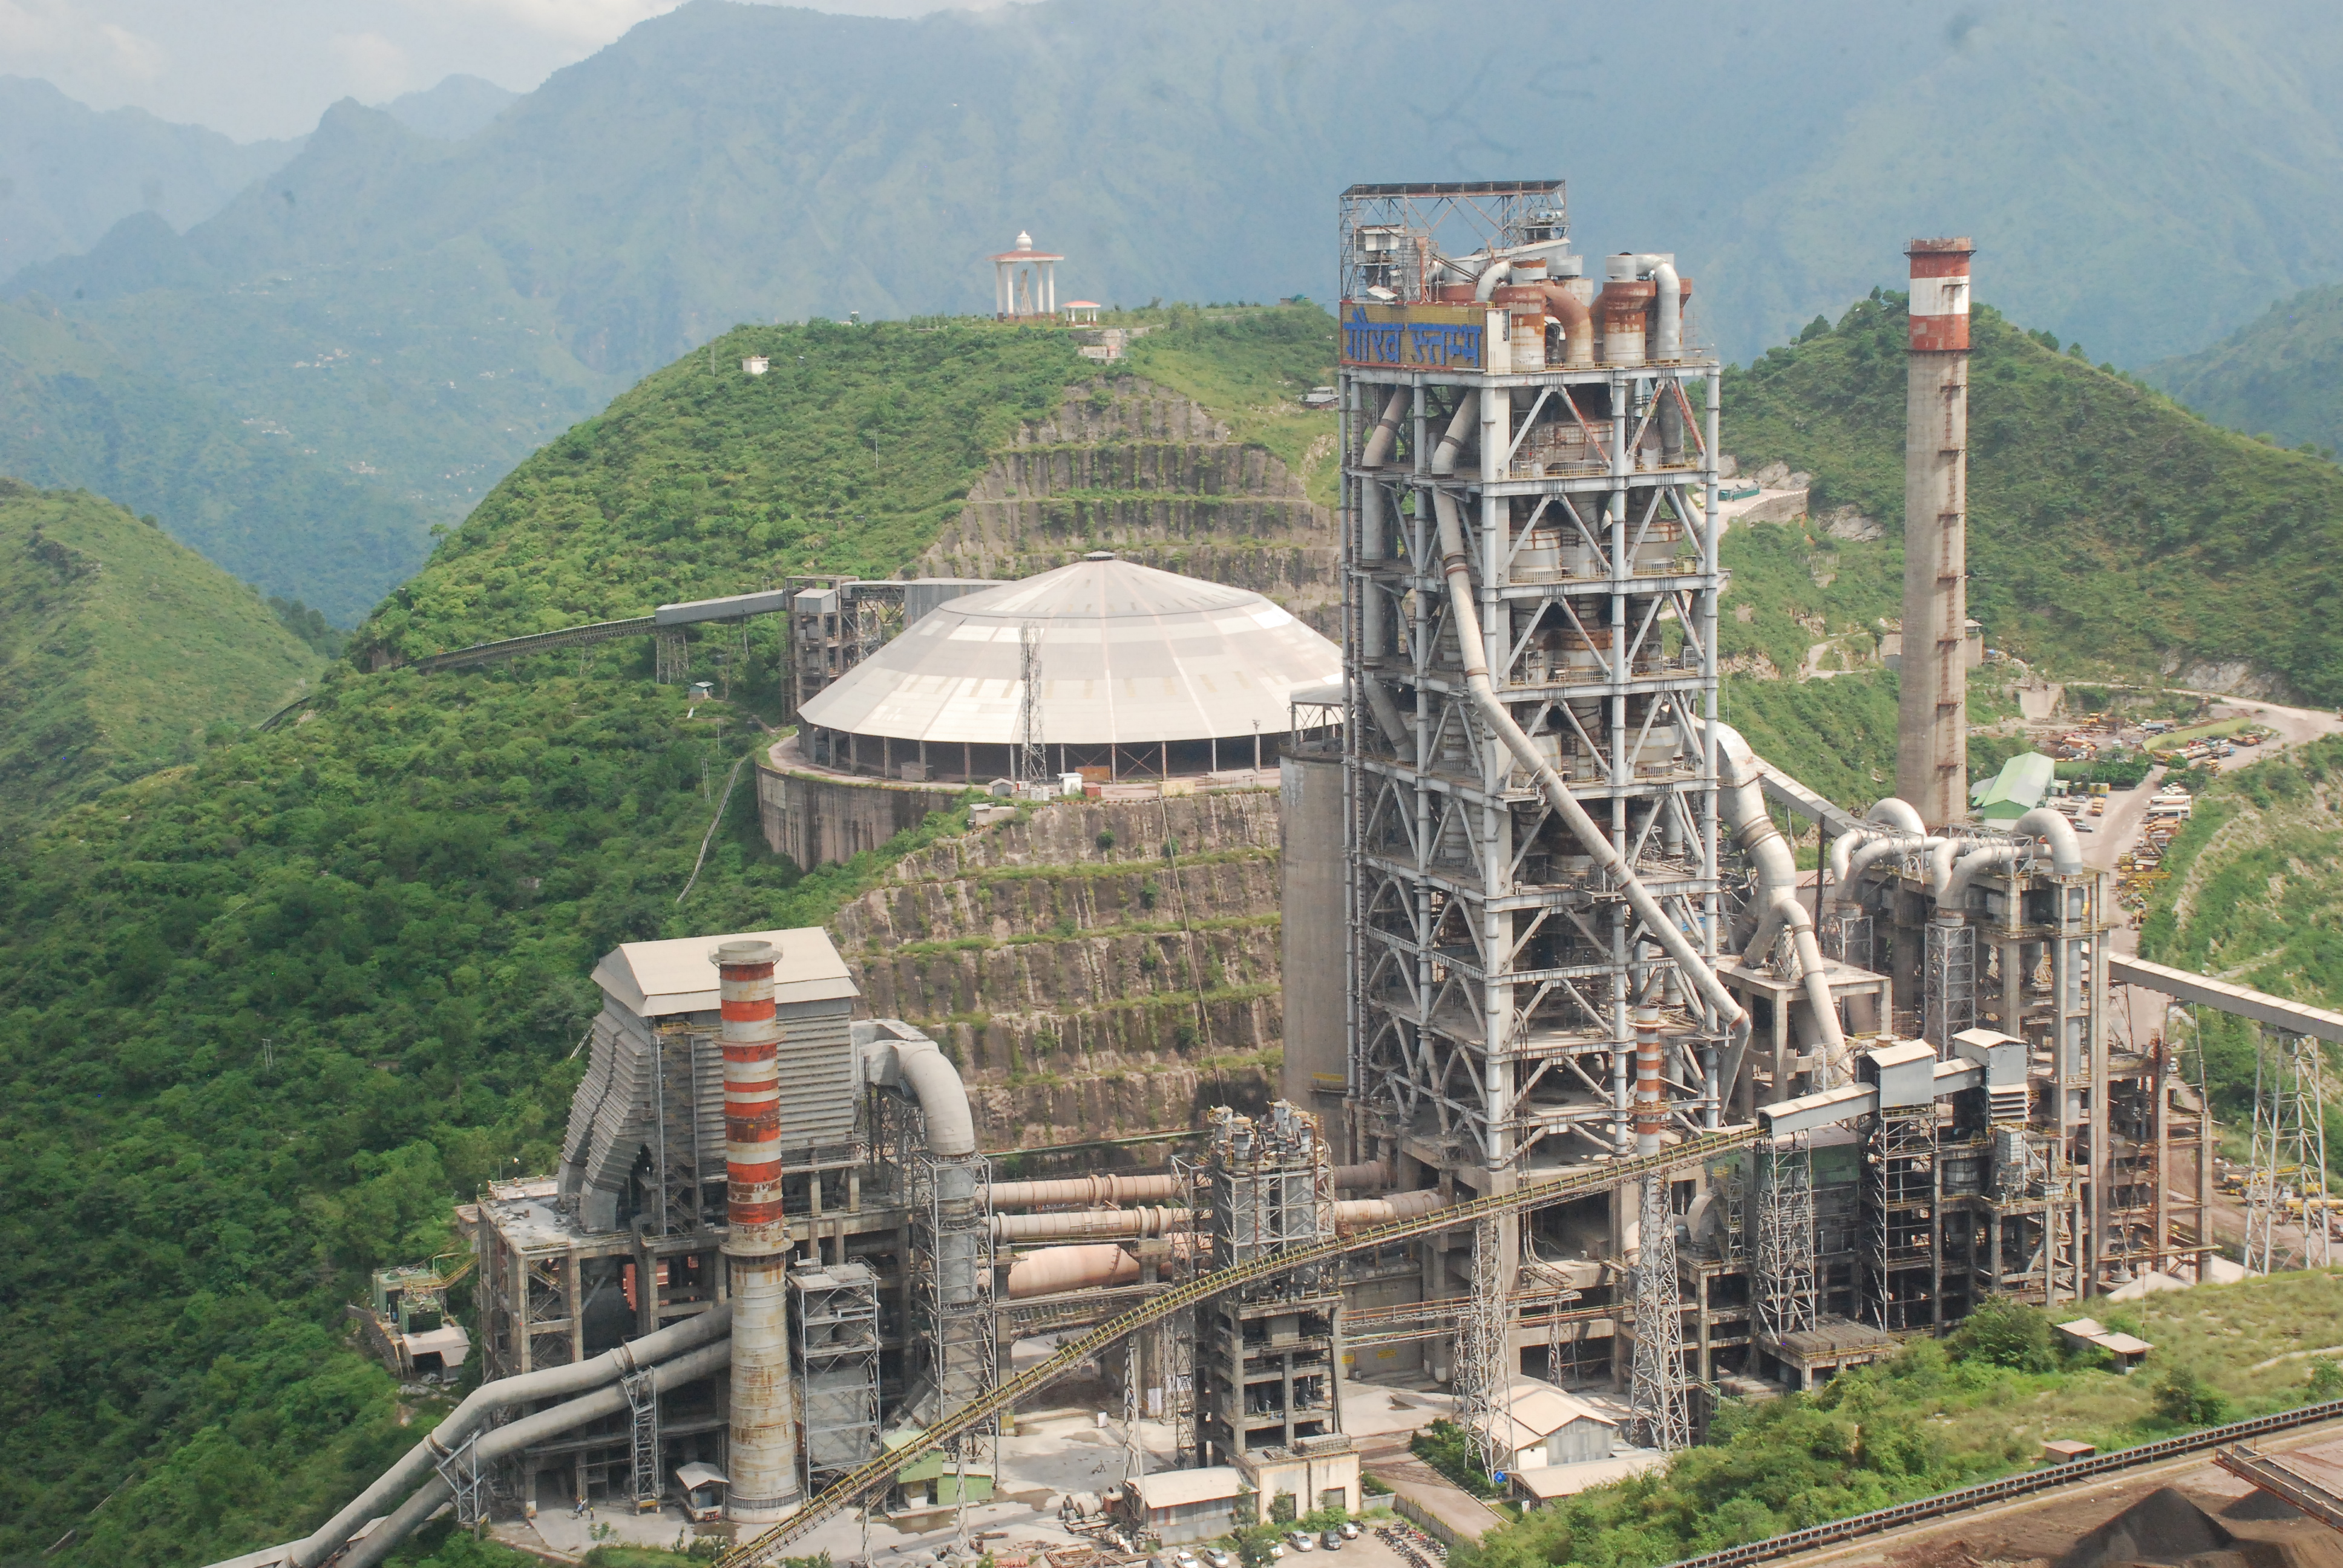  Baga Cement Works